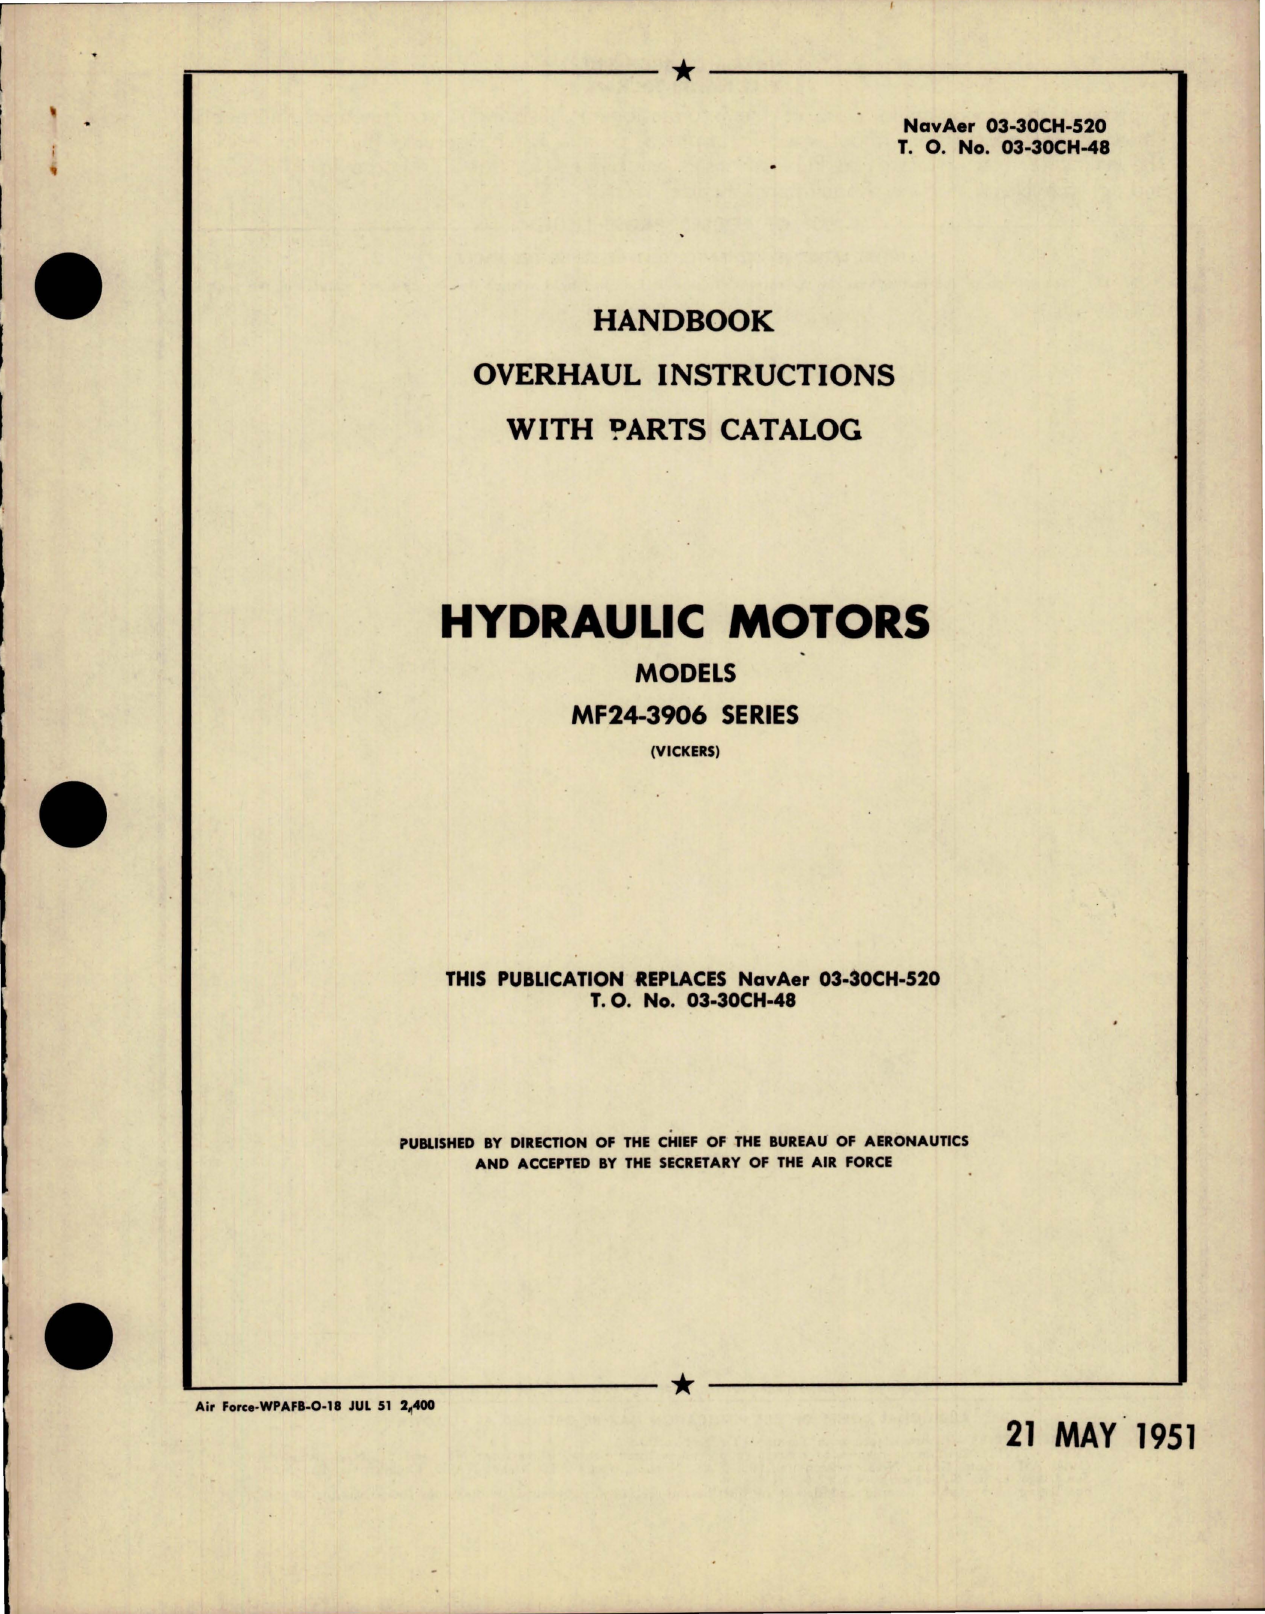 Sample page 1 from AirCorps Library document: Overhaul Instructions with Parts Catalog for Hydraulic Motors - Models MF24-3906 Series